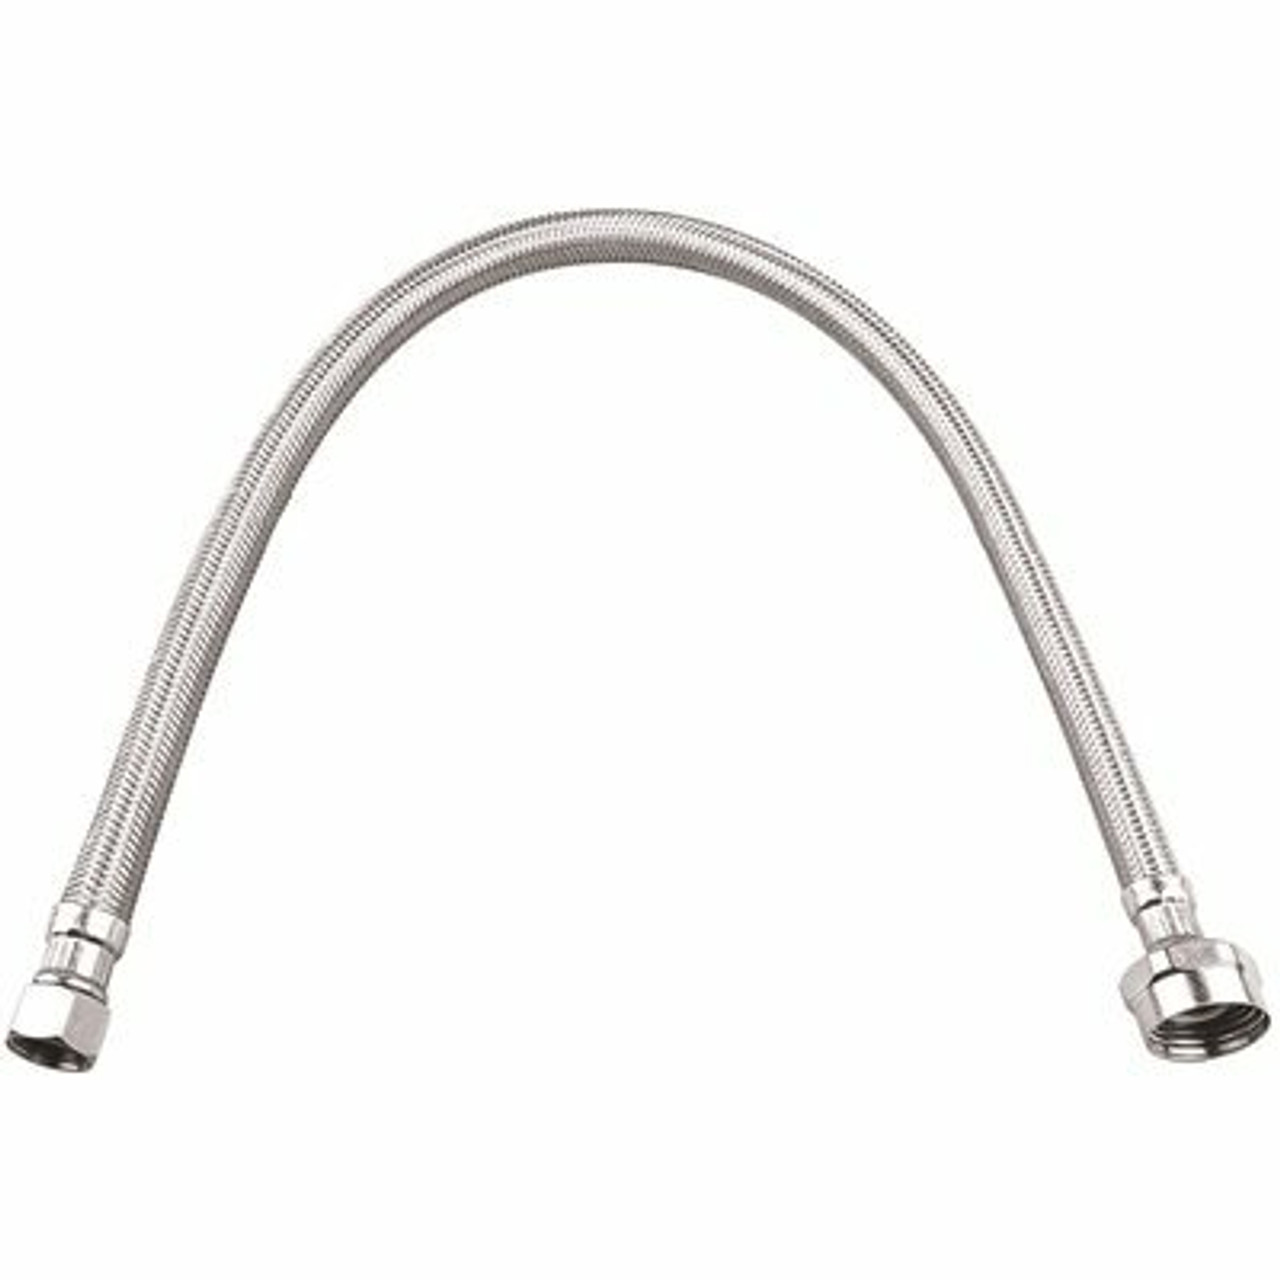 Durapro 3/8 In. Compression X 7/8 In. Metal Ballcock X 16 In. Braided Stainless Steel Toilet Connector